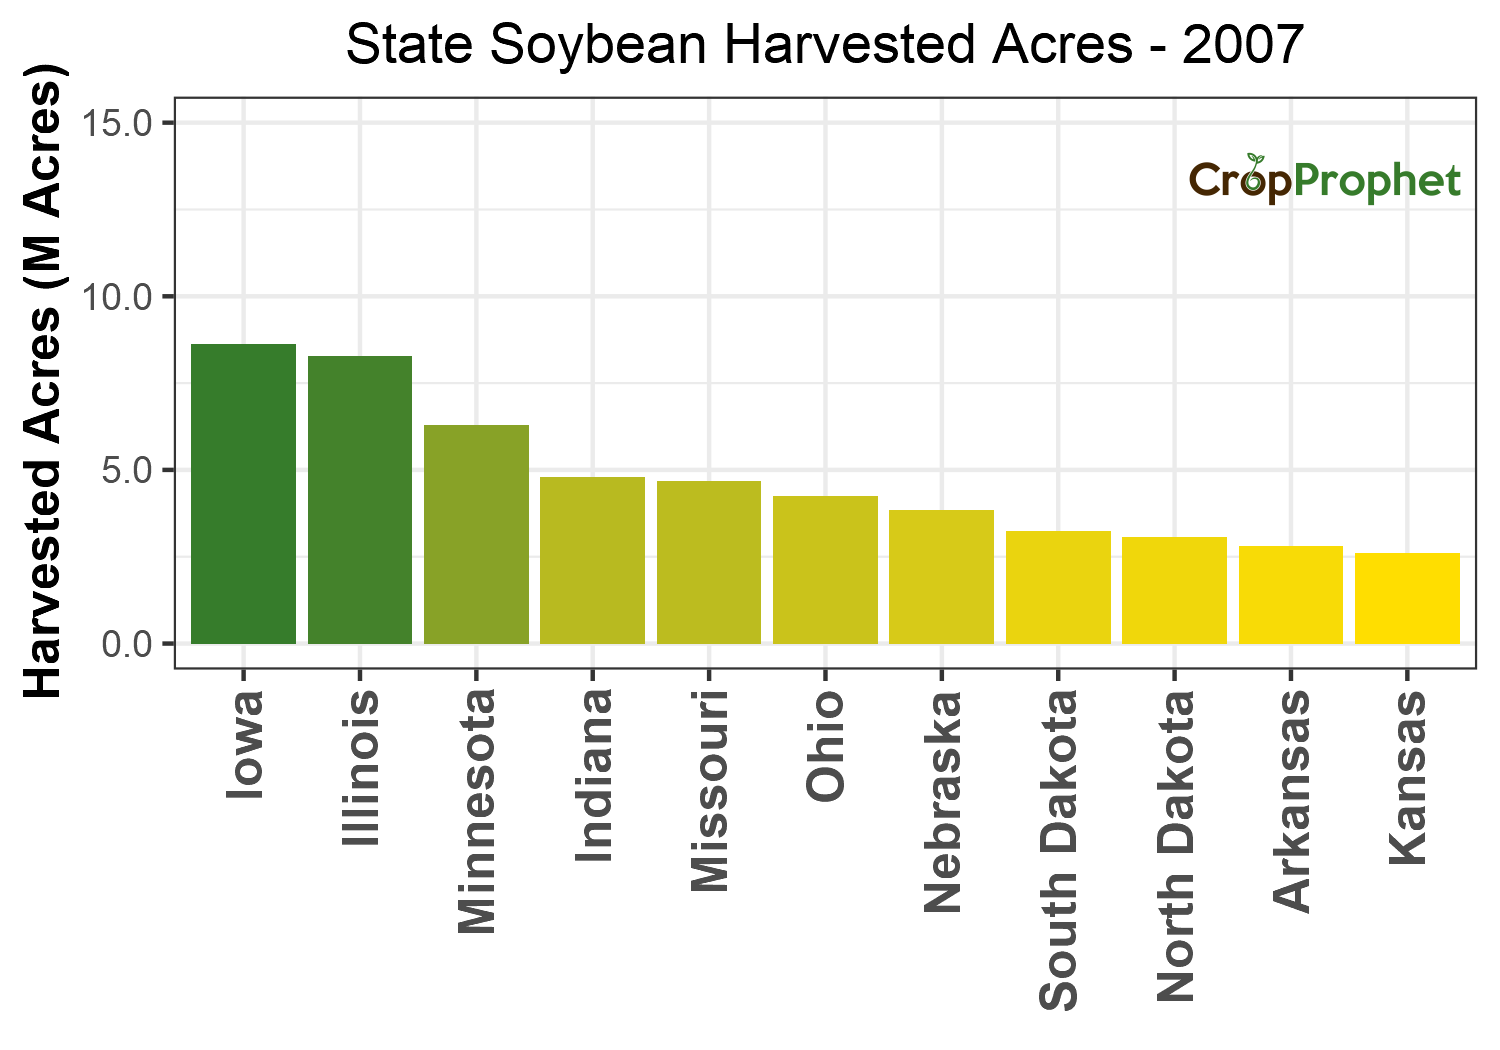 Soybean Harvested Acres by State - 2007 Rankings